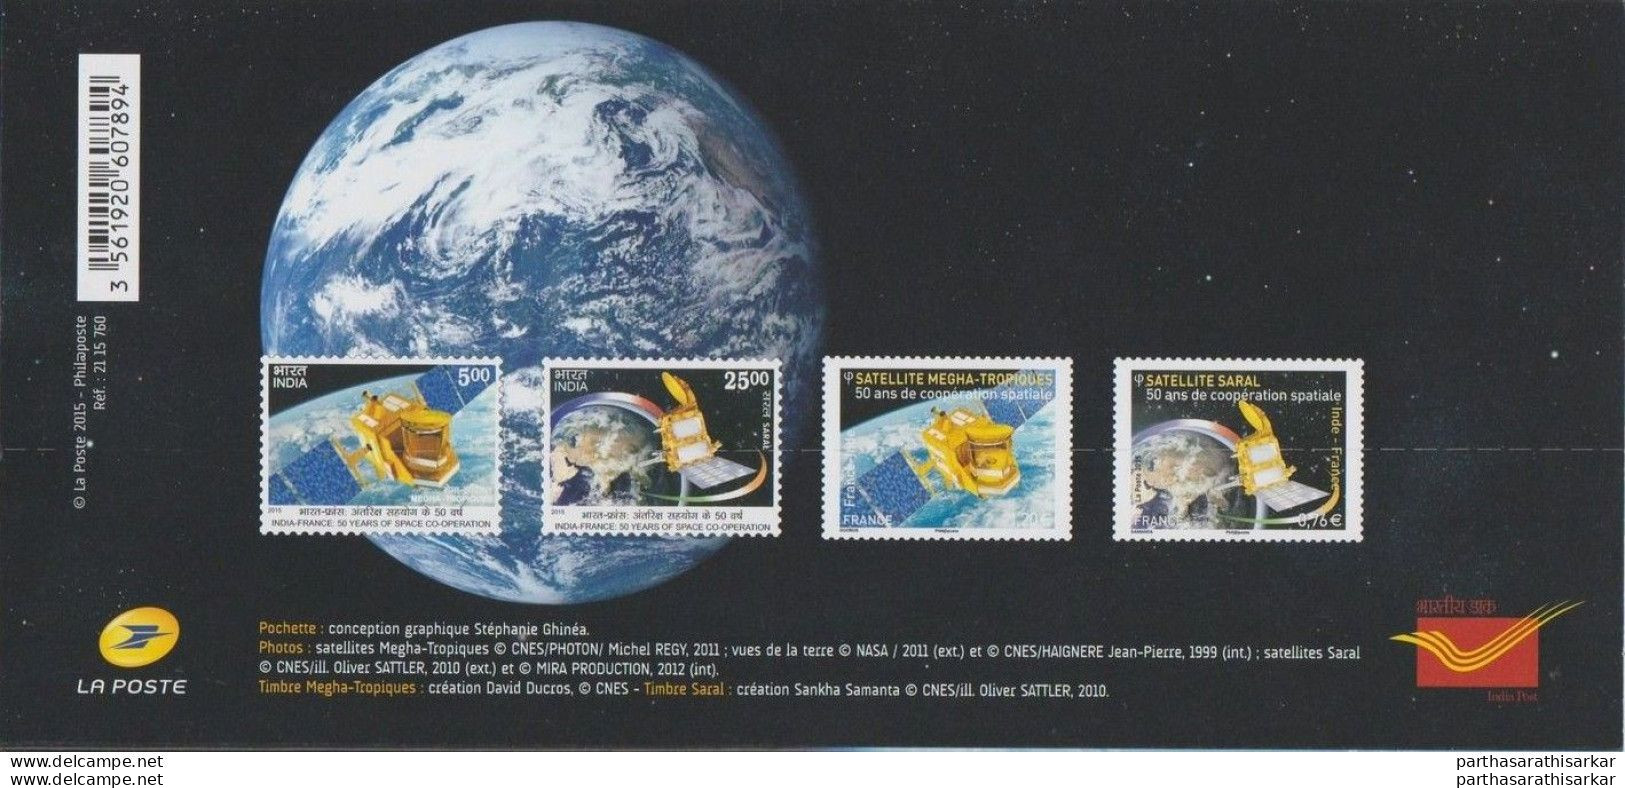 FRANCE 2015 JOINT ISSUE WITH INDIA SPACE PROGRAM OFFICIAL PRESENTATION PACK EXTREMELY RARE HARD TO FIND MNH - 2013-2018 Marianne Of Ciappa-Kawena